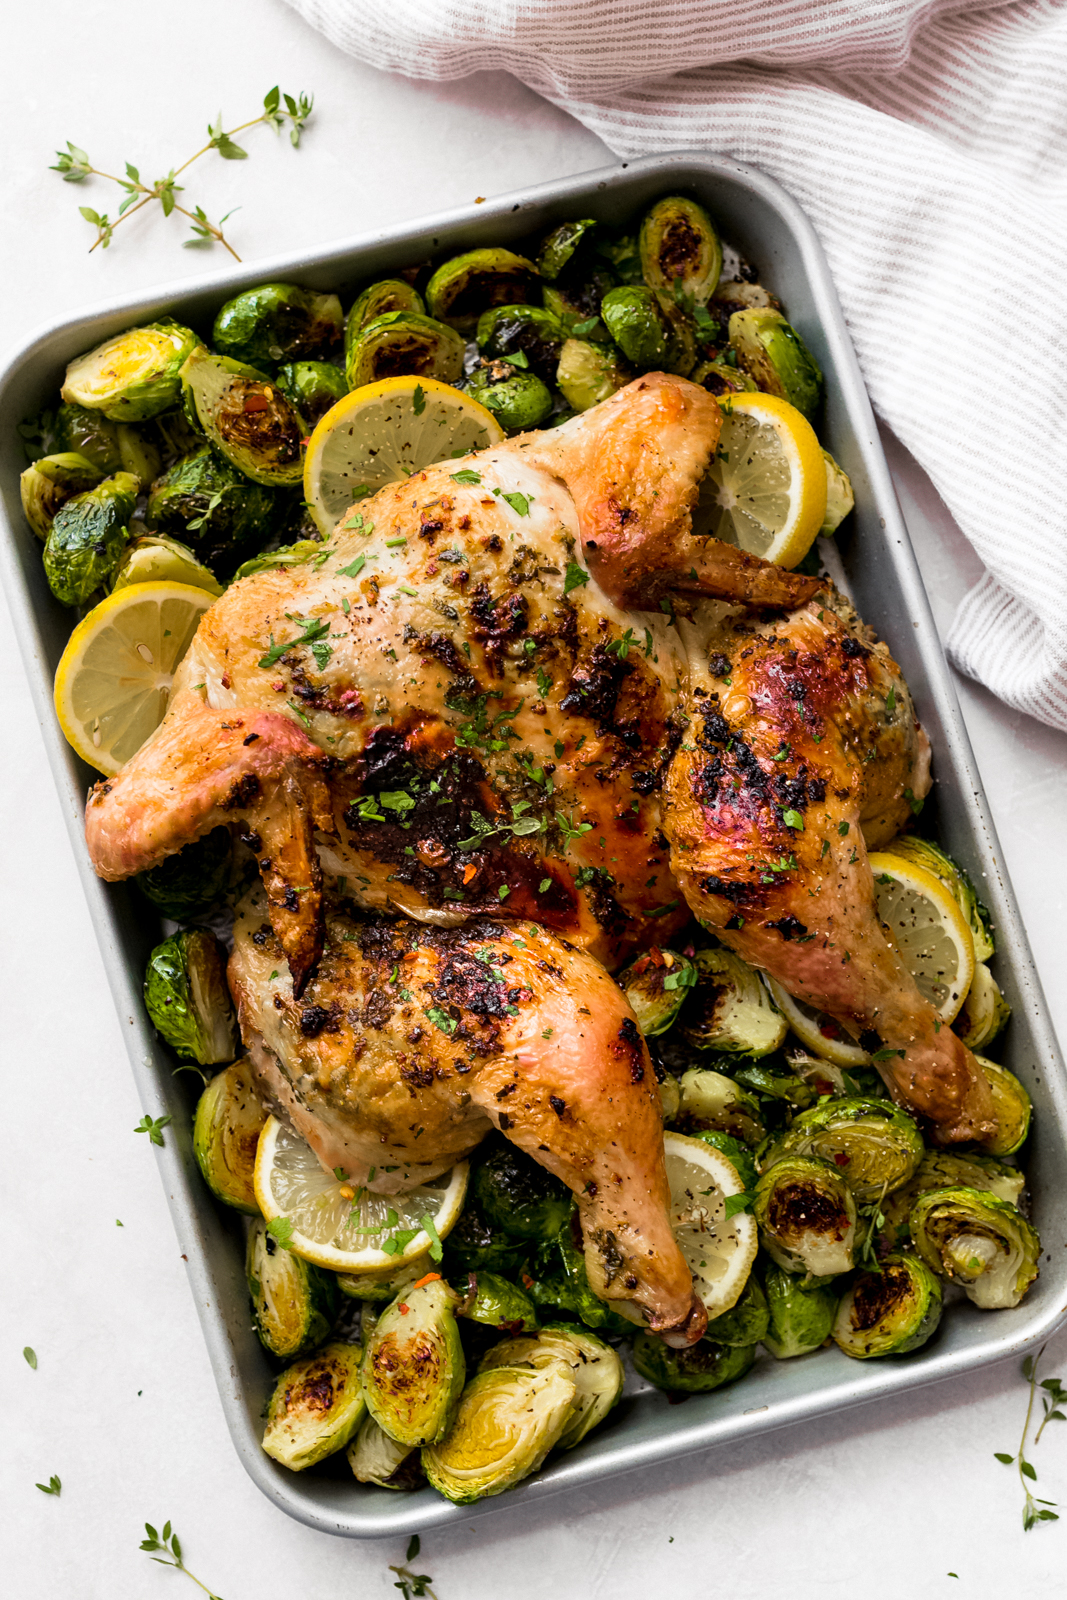 sheet pan with lemon slices, roasted sprouts, and a whole roasted chicken on top